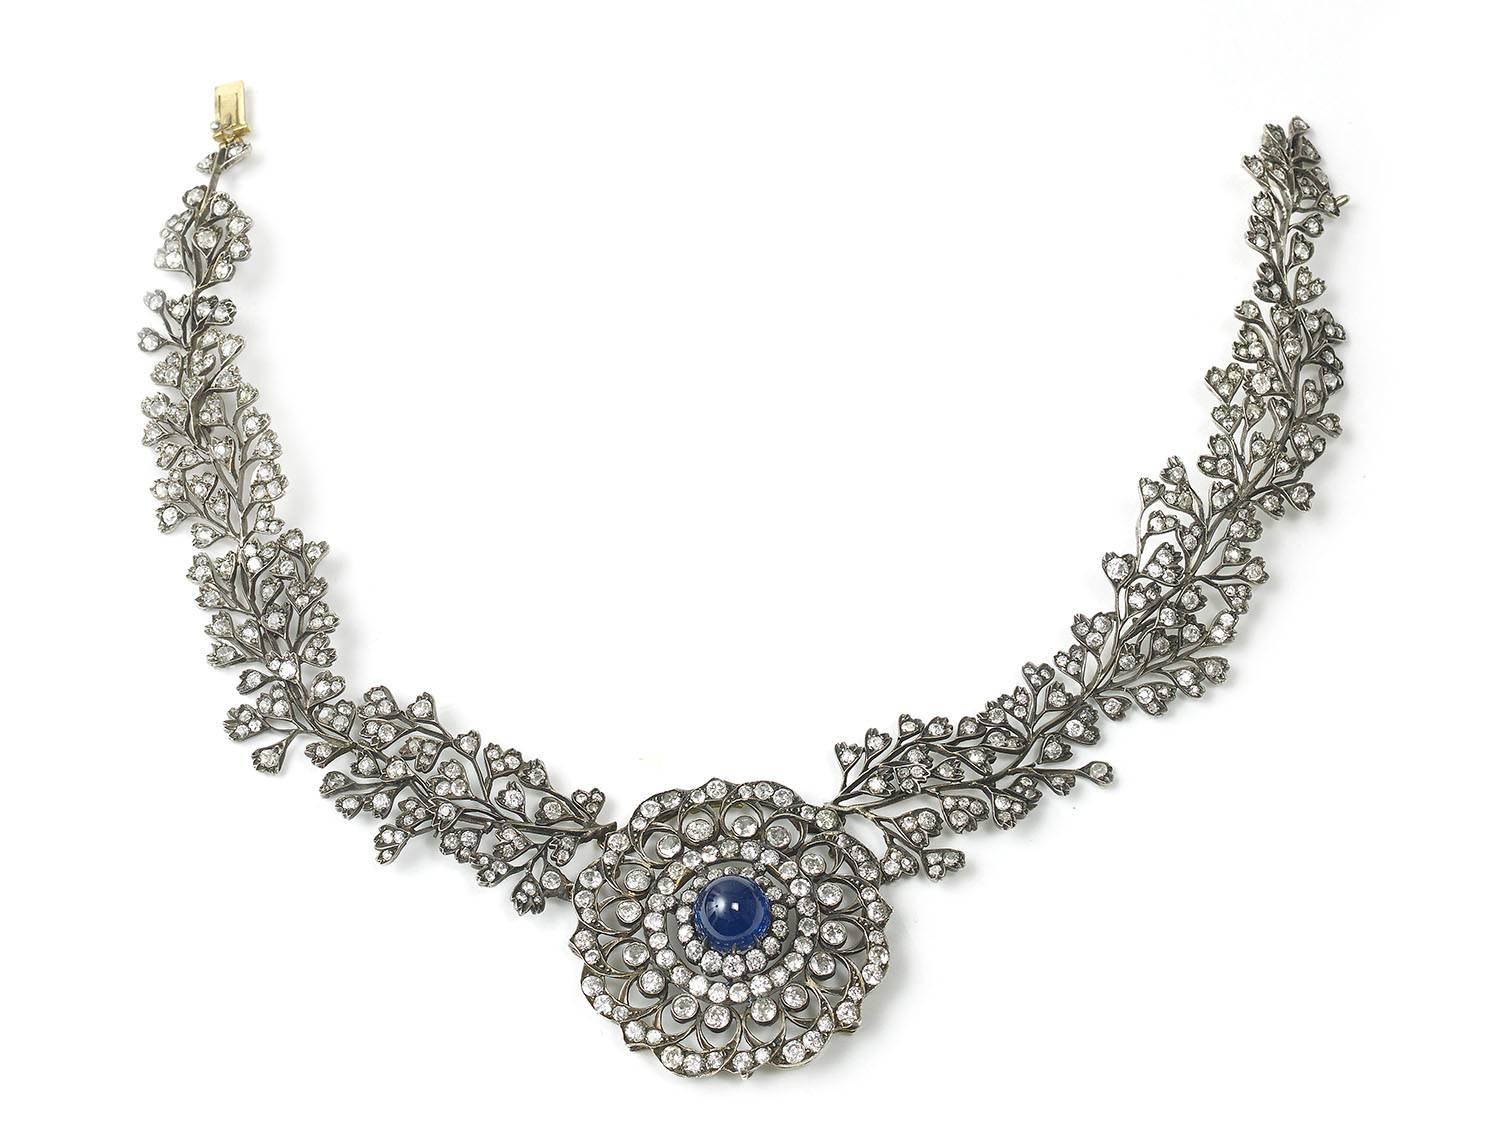 A sapphire and diamond necklace, central circular panel, set with a high cabochon-cut sapphire measuring approximately 12.34 x 12.56mm, within a floral openwork design of old-cut diamonds, integrated collar featuring branches, set with old-cut